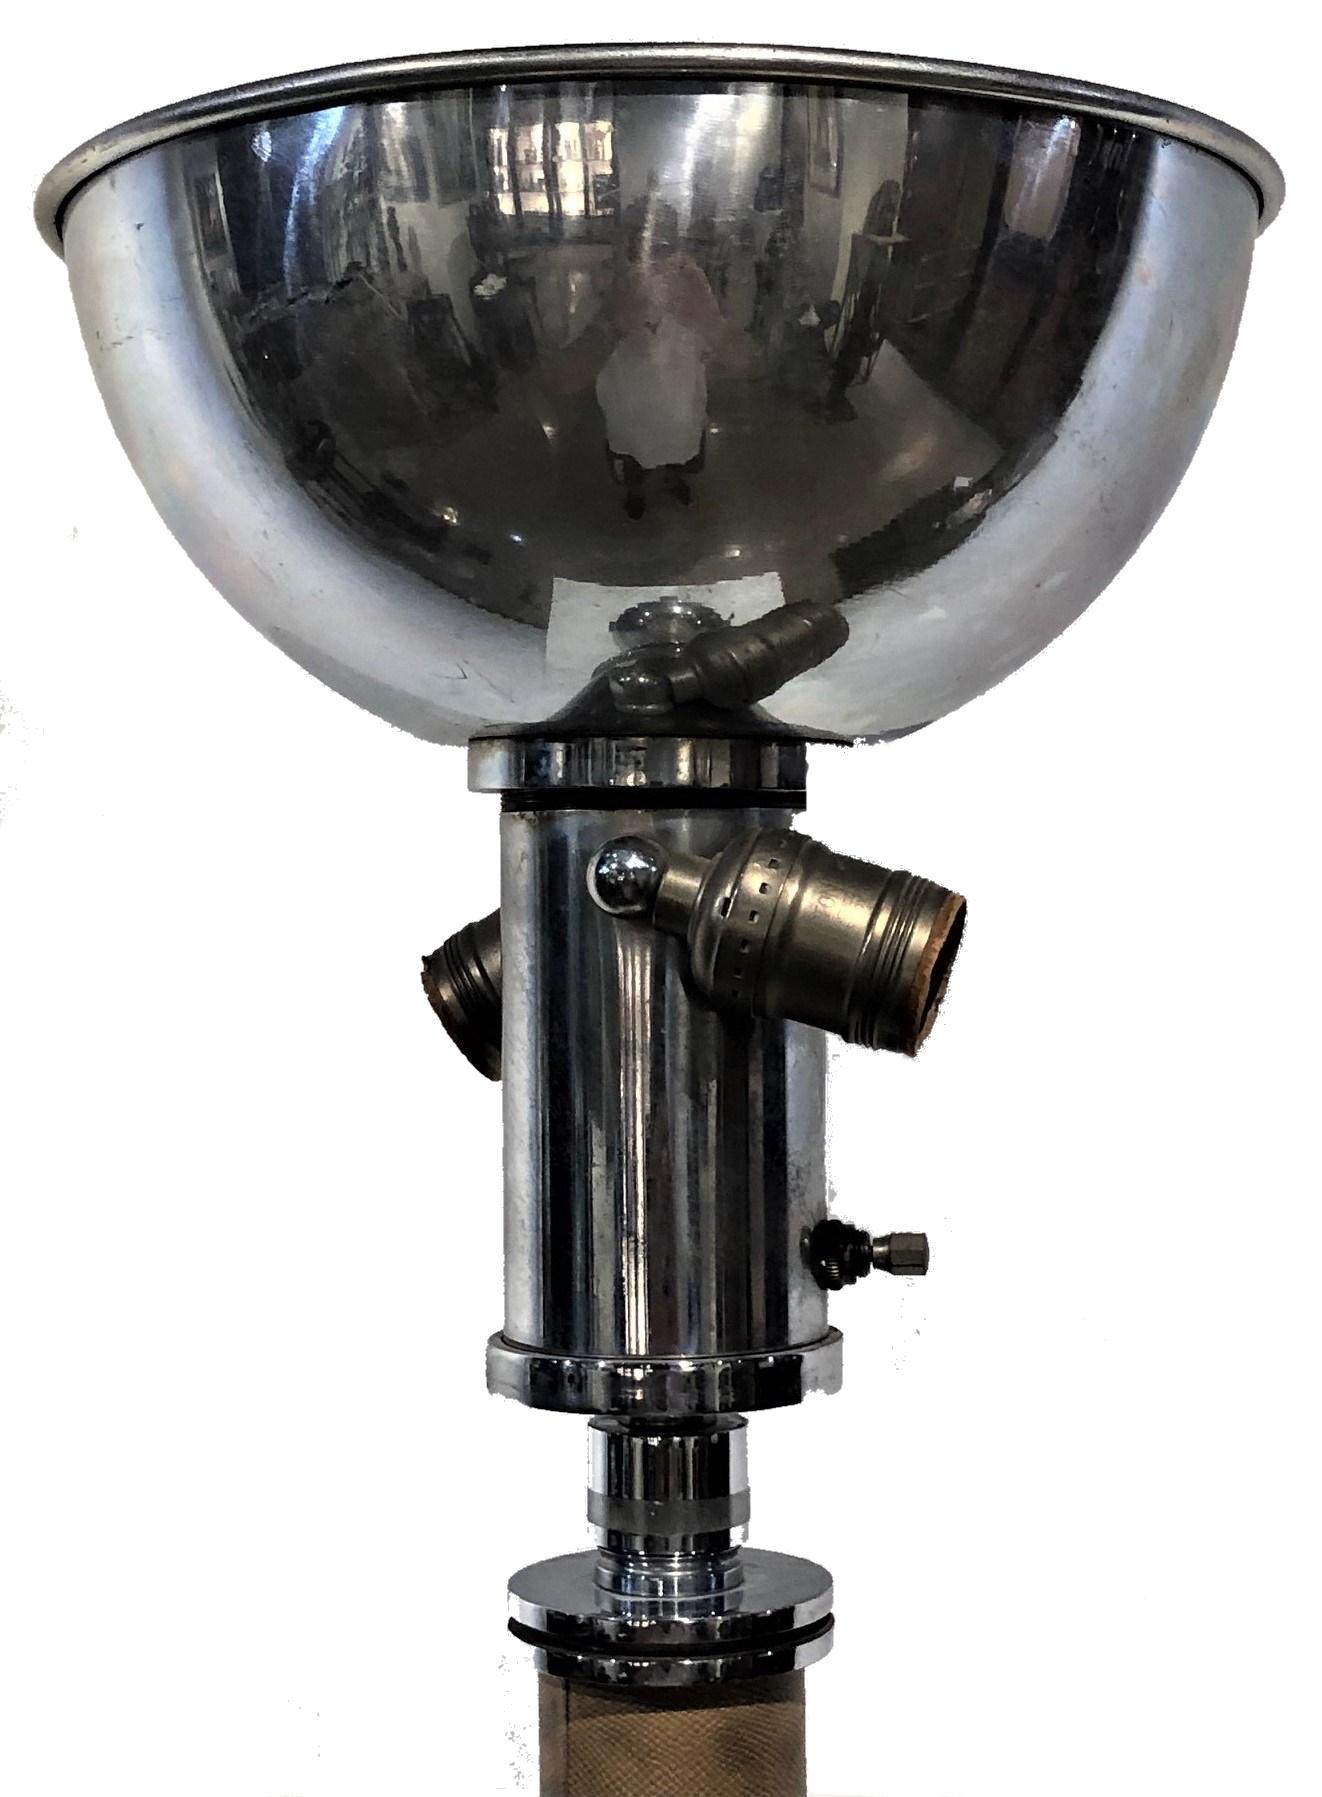 American Art Deco 
Table Lamp
Chromed Metal & Leather 
ca. 1930s

ABOUT
Art Deco table lamps are a classic and elegant addition to any home, thanks to their sleek, geometric shapes and bold, geometric patterns.
They originated in the 1920s and 1930s